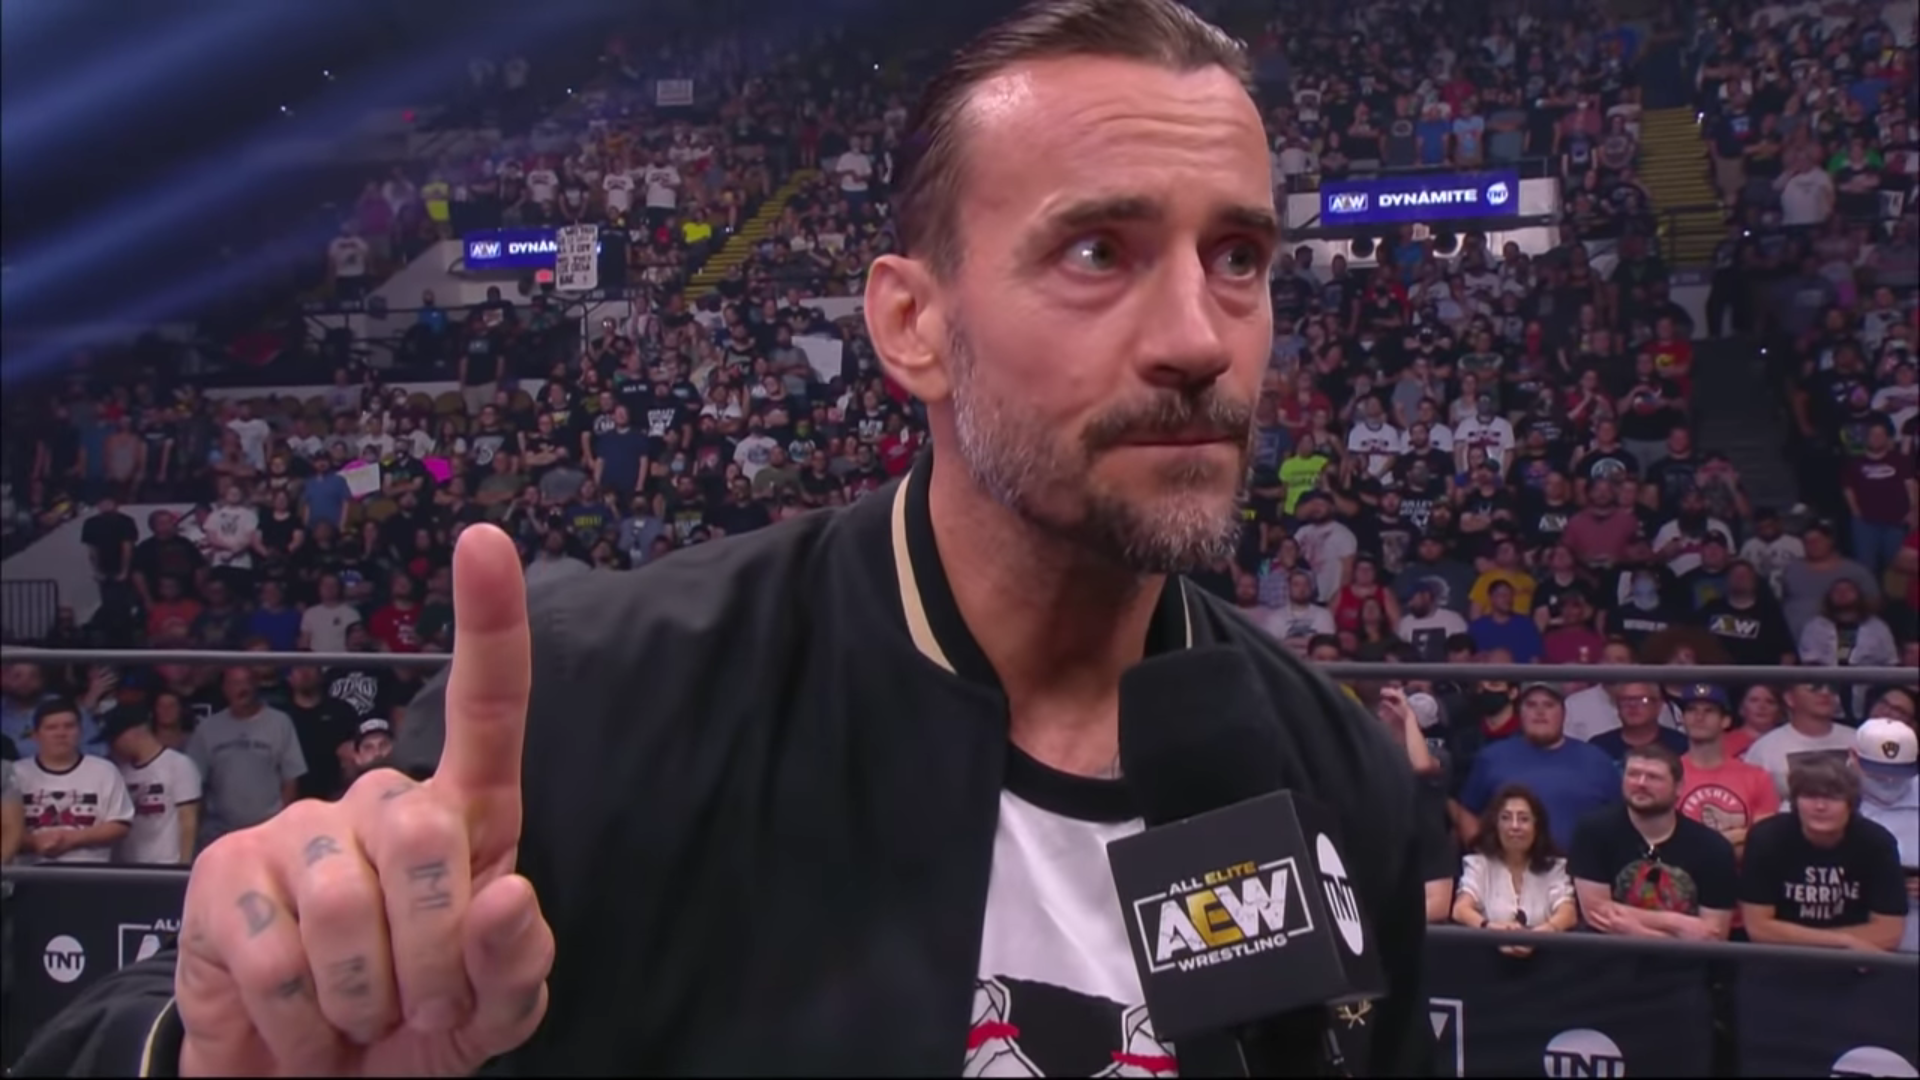 CM Punk teases Daniel Bryan for AEW and tells fans to be ‘patient’ about WWE star’s arrival